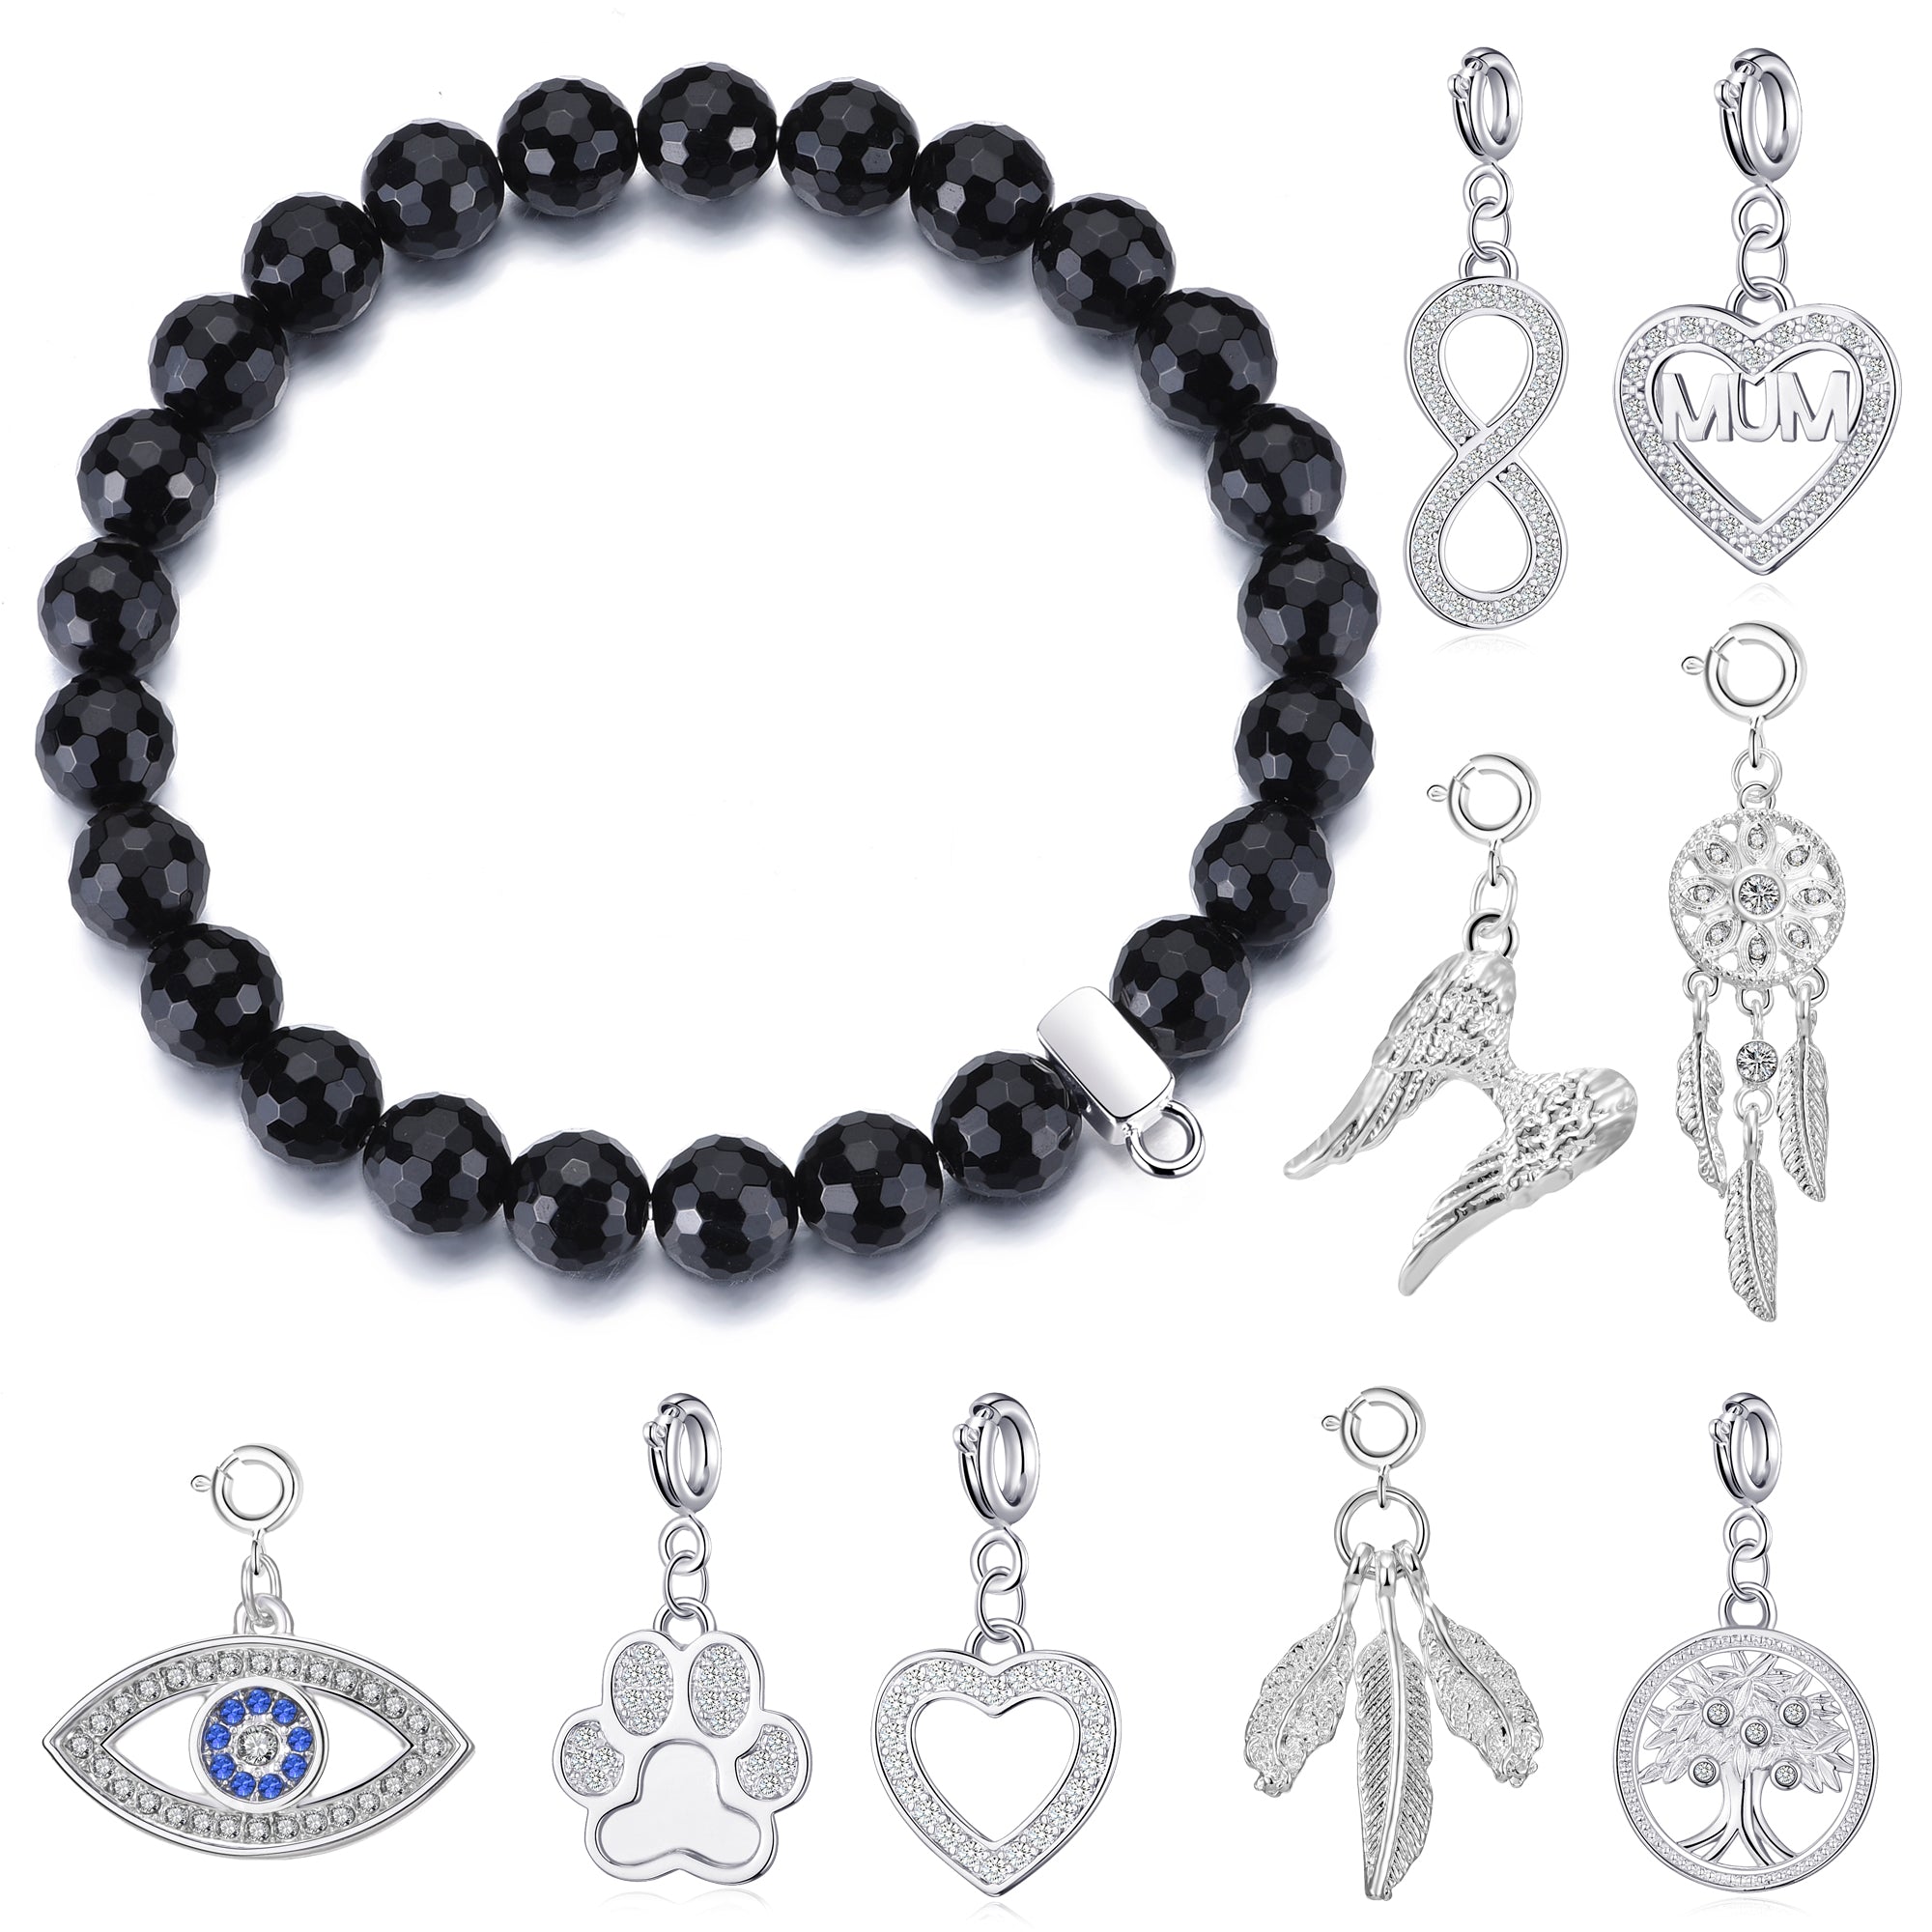 Faceted Black Onyx Gemstone Stretch Bracelet with Charm Created with Zircondia® Crystals by Philip Jones Jewellery